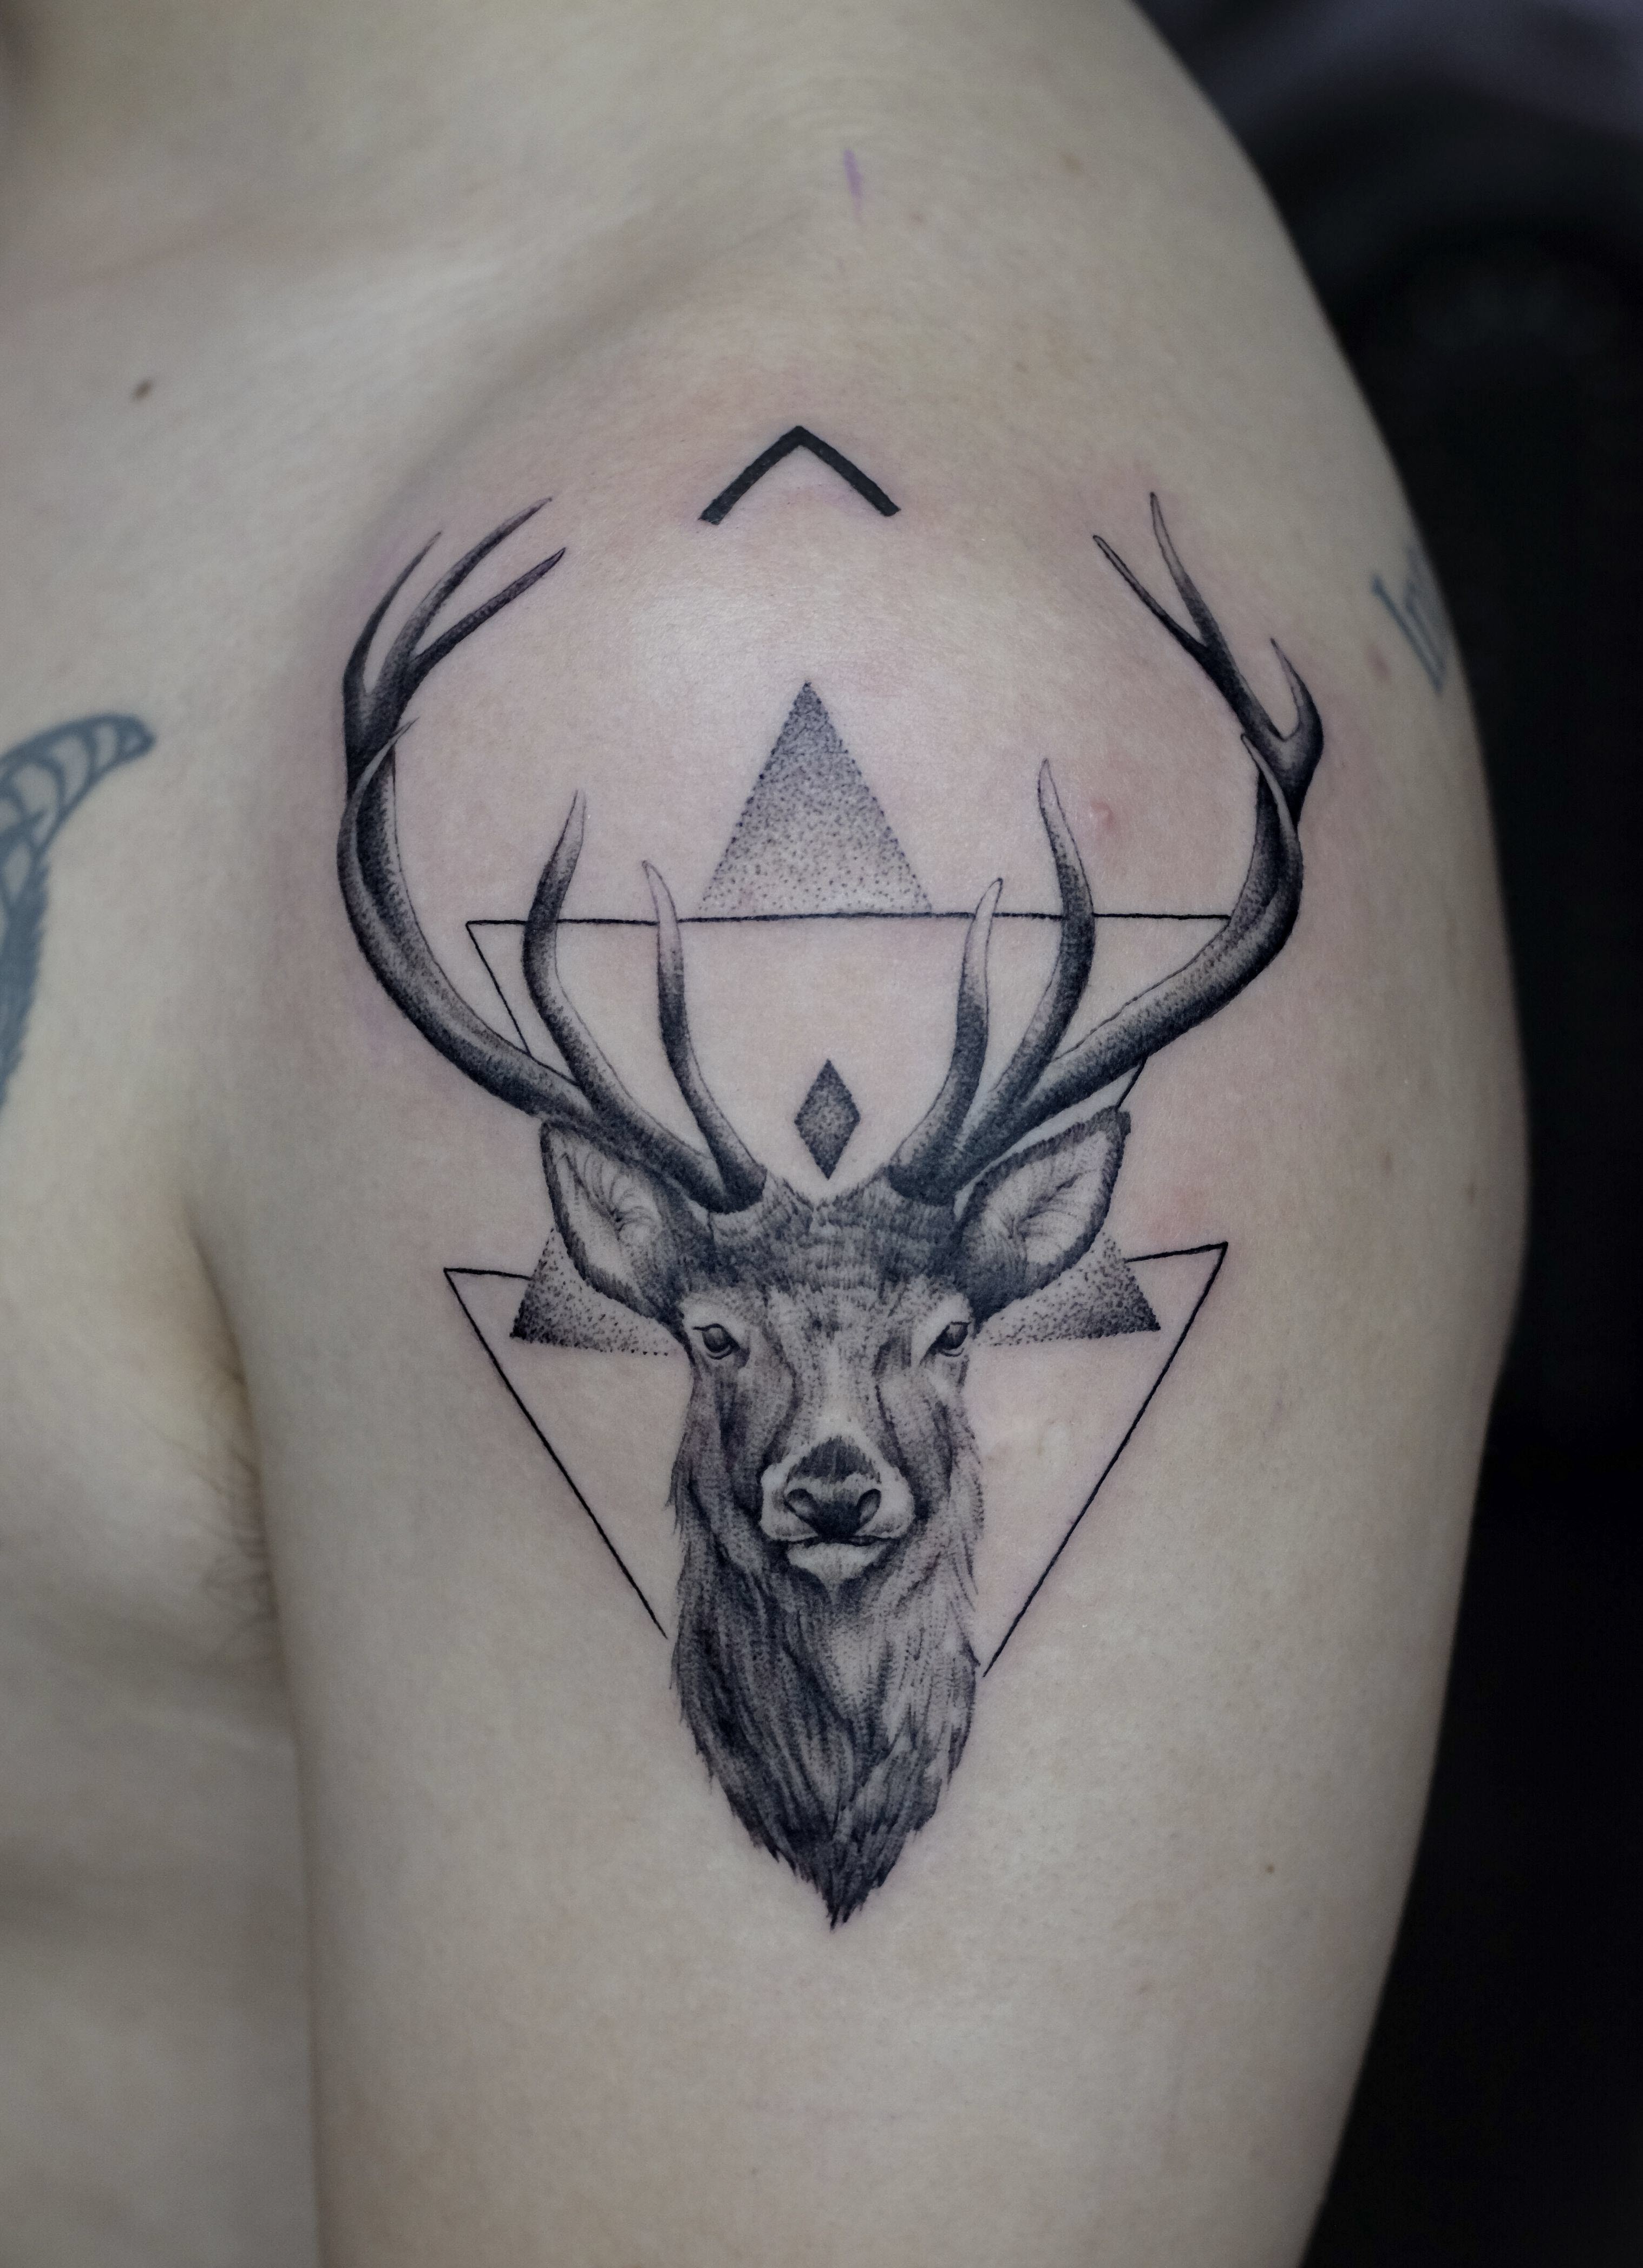 Simple Stag and Roses Tattoo Design by kirstynoelledavies on DeviantArt